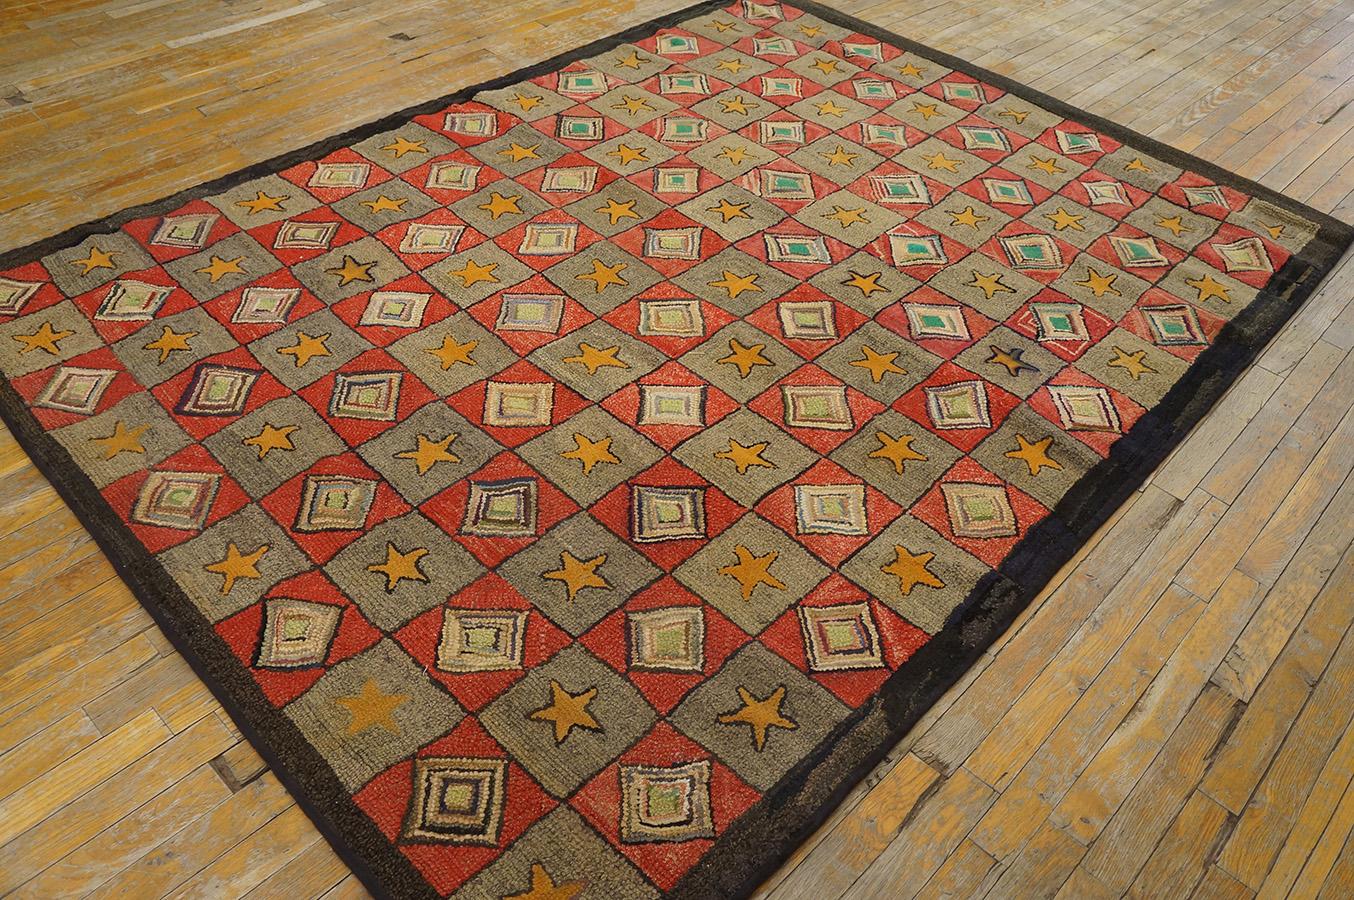 Antique American Hooked rug, size: 6'8